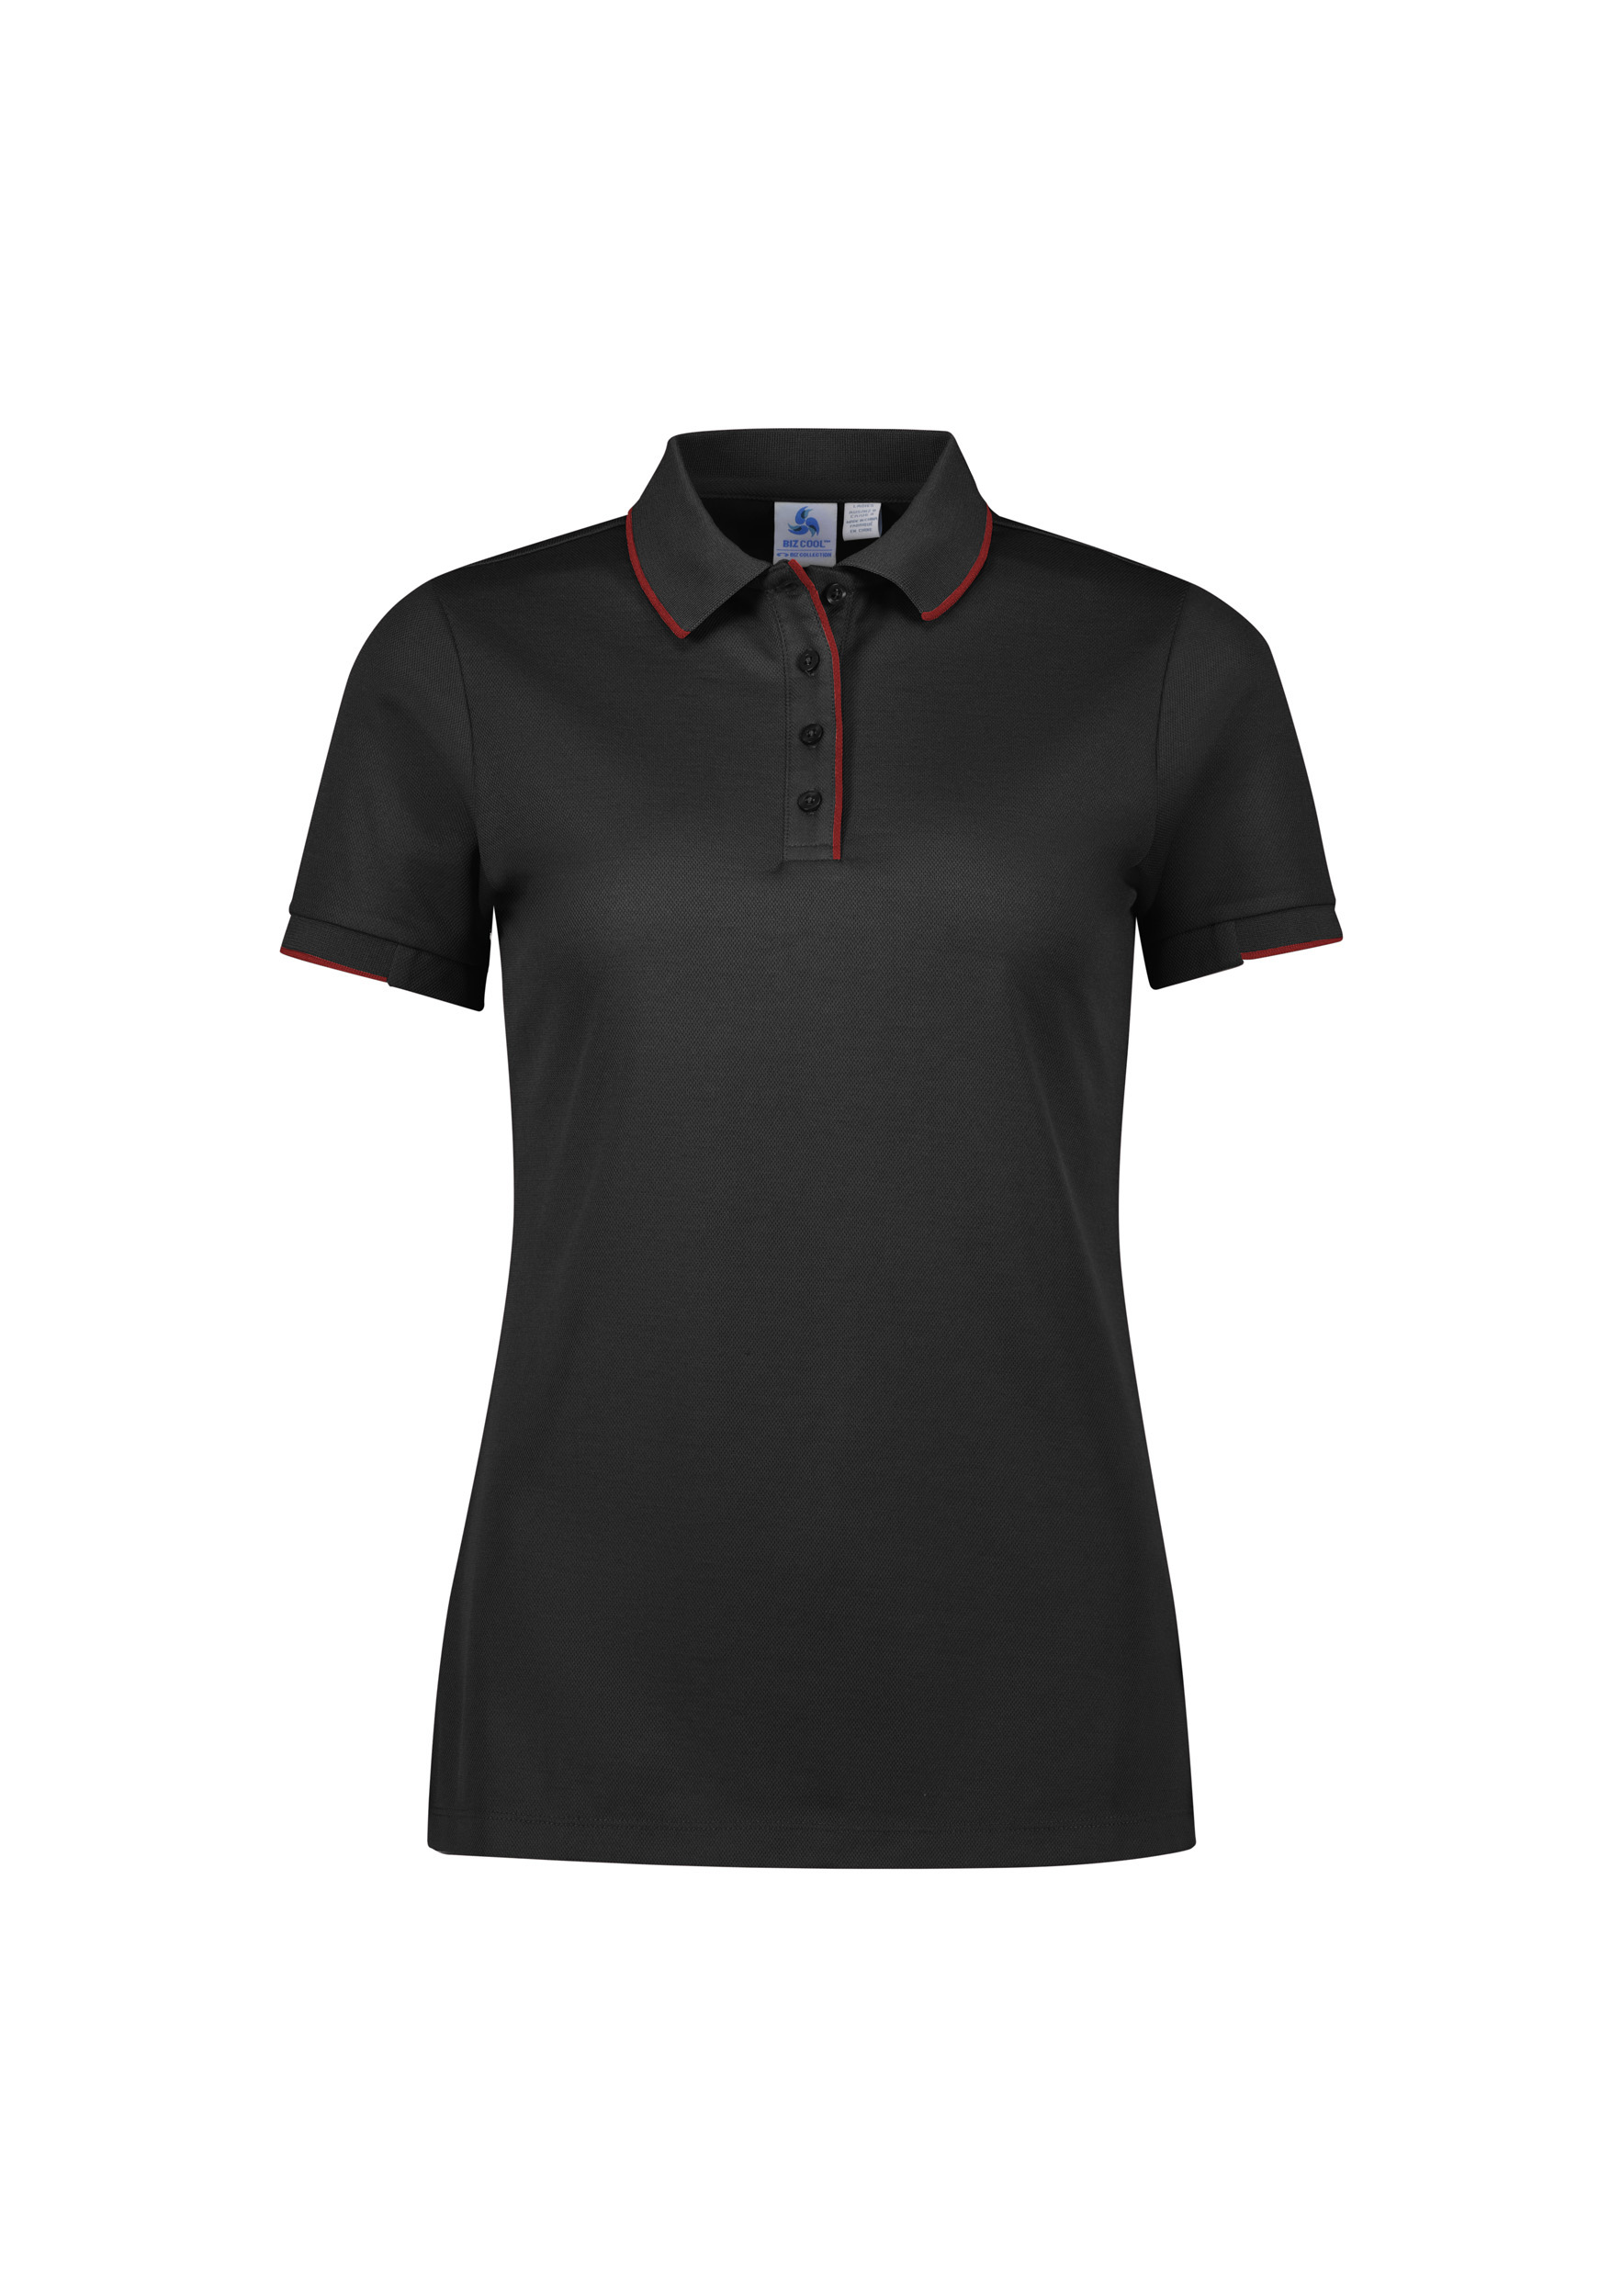 WOMENS FOCUS POLO BLK/RED 10 80% POLY, 20% COTTON-BACK 185GSM